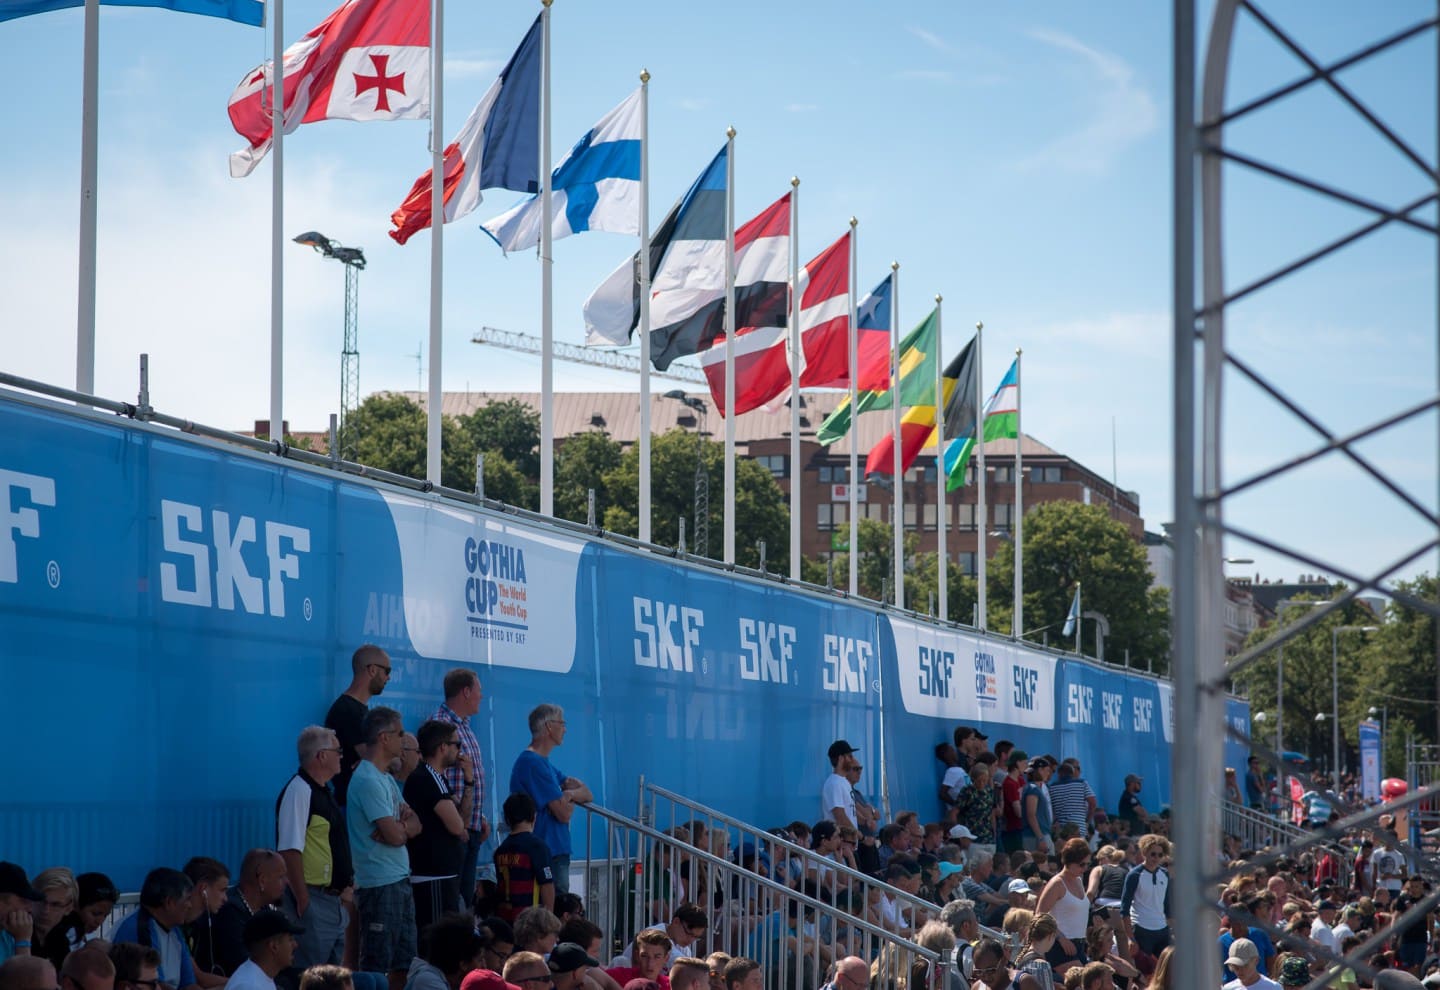 Gothia Cup SKF Gothenburg 2016 Front Row Exhibitions